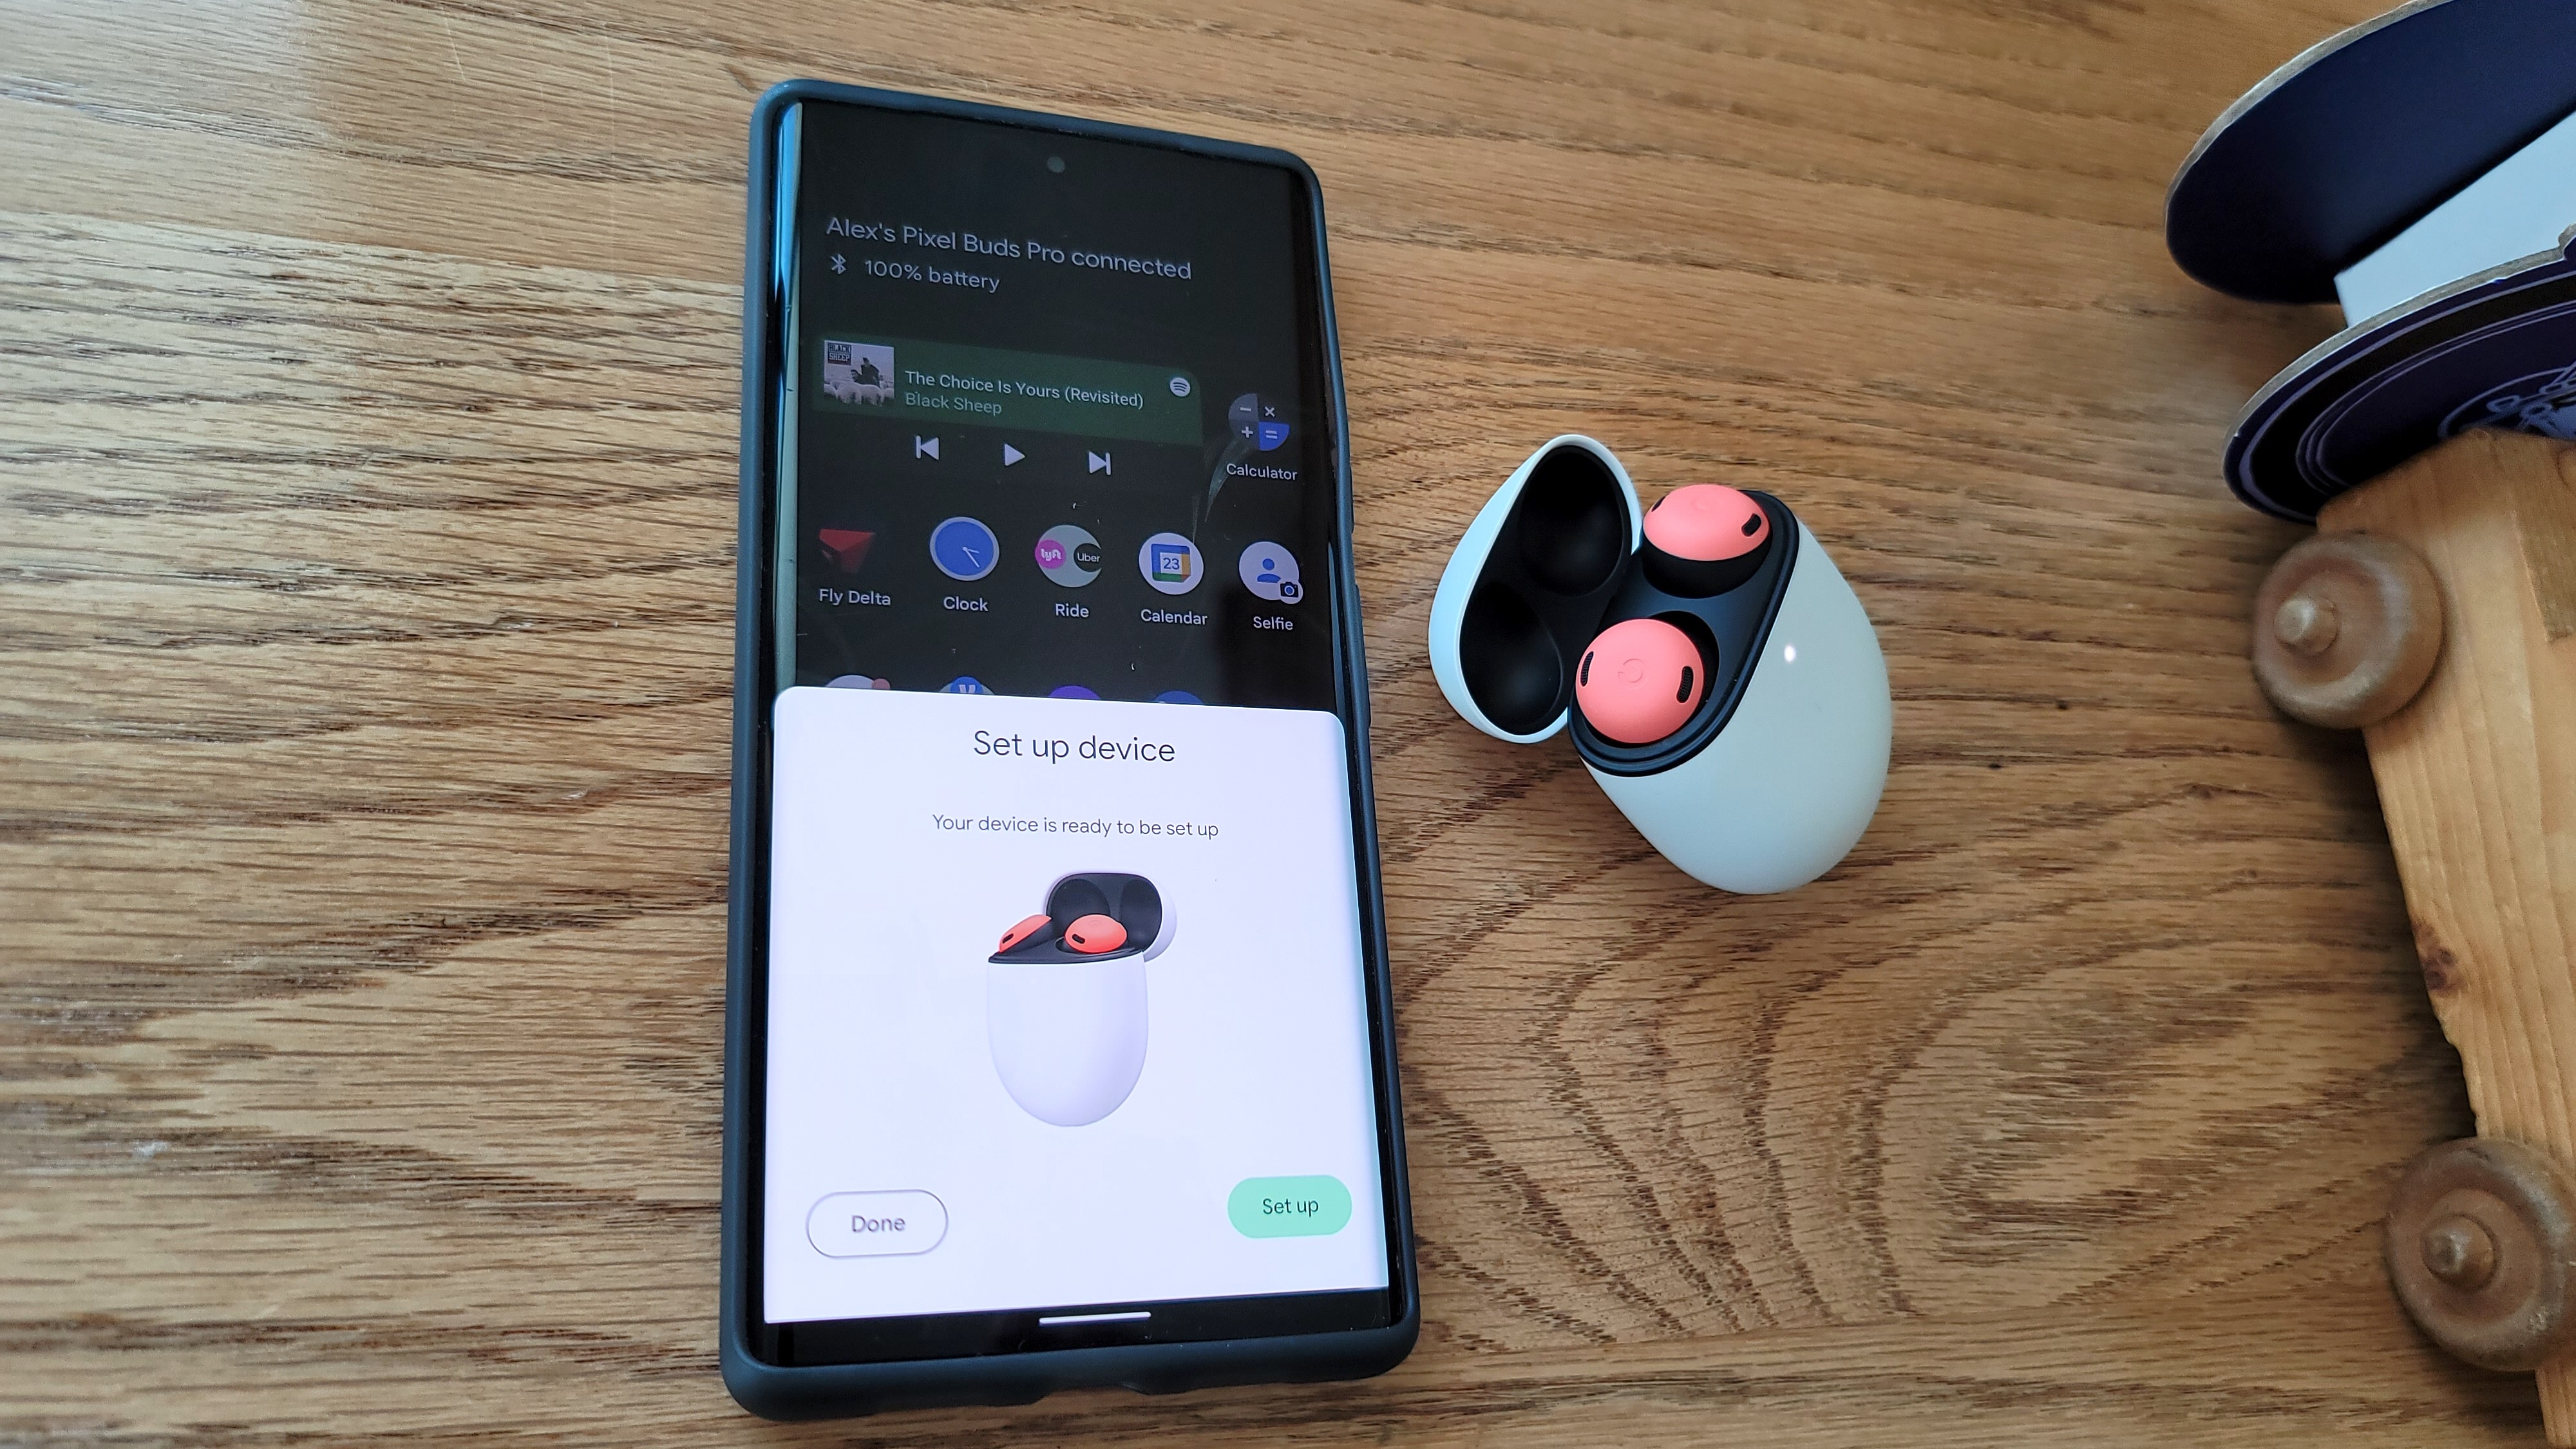 One-tap Google Fast Pair being executed on the Google Pixel Buds Pro